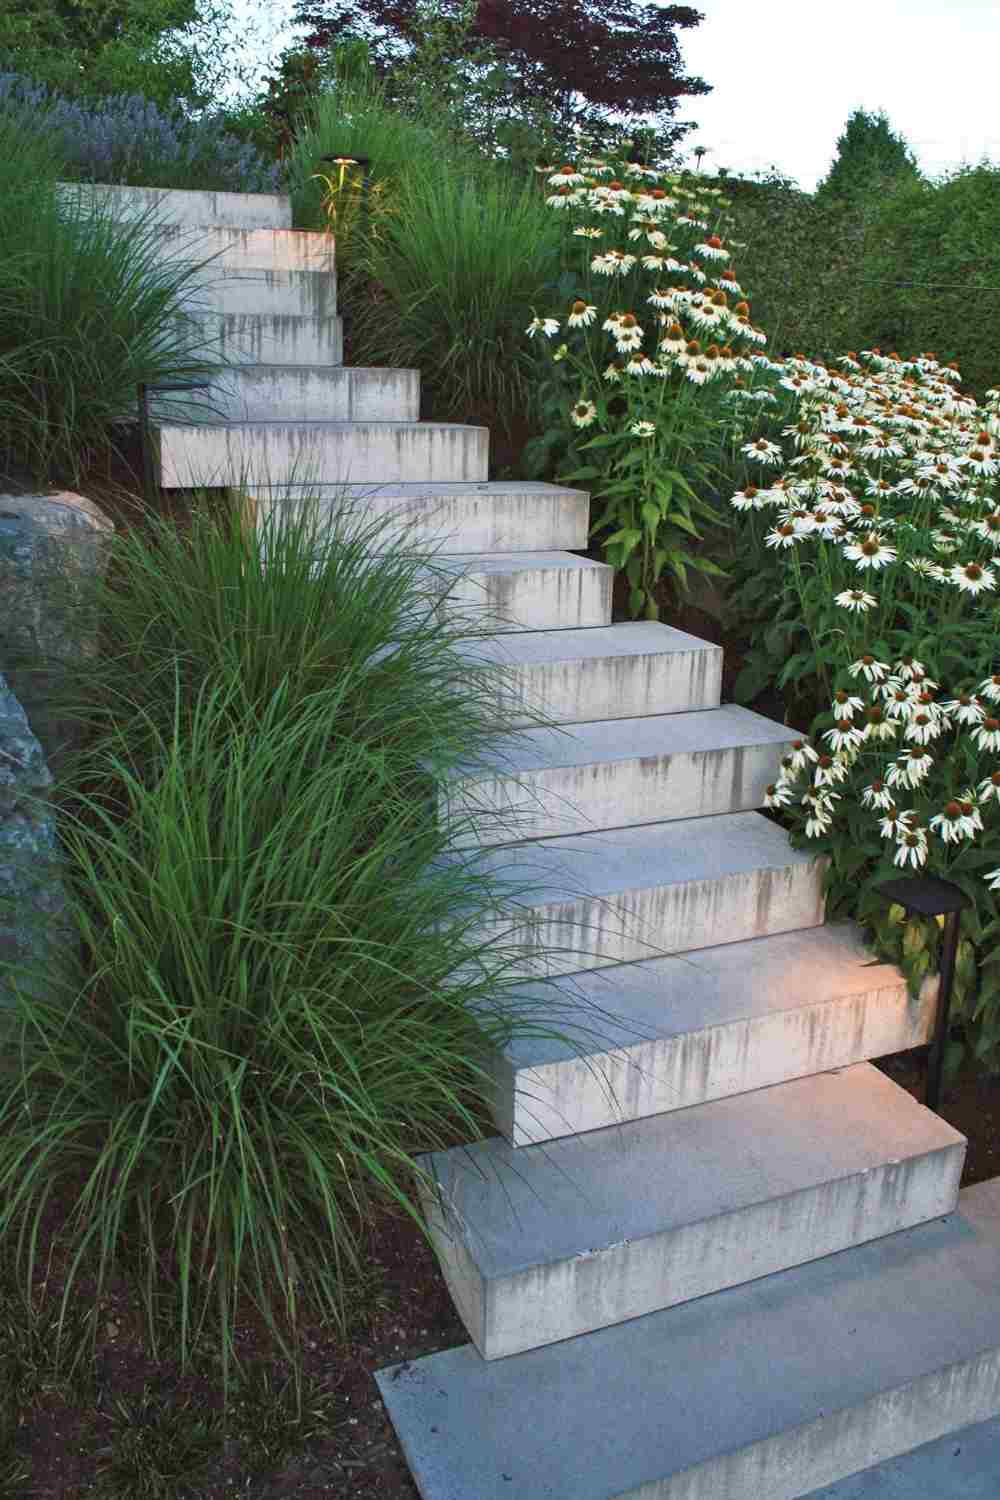 creative hanging of concrete stairs and green plants with flowers for gardening